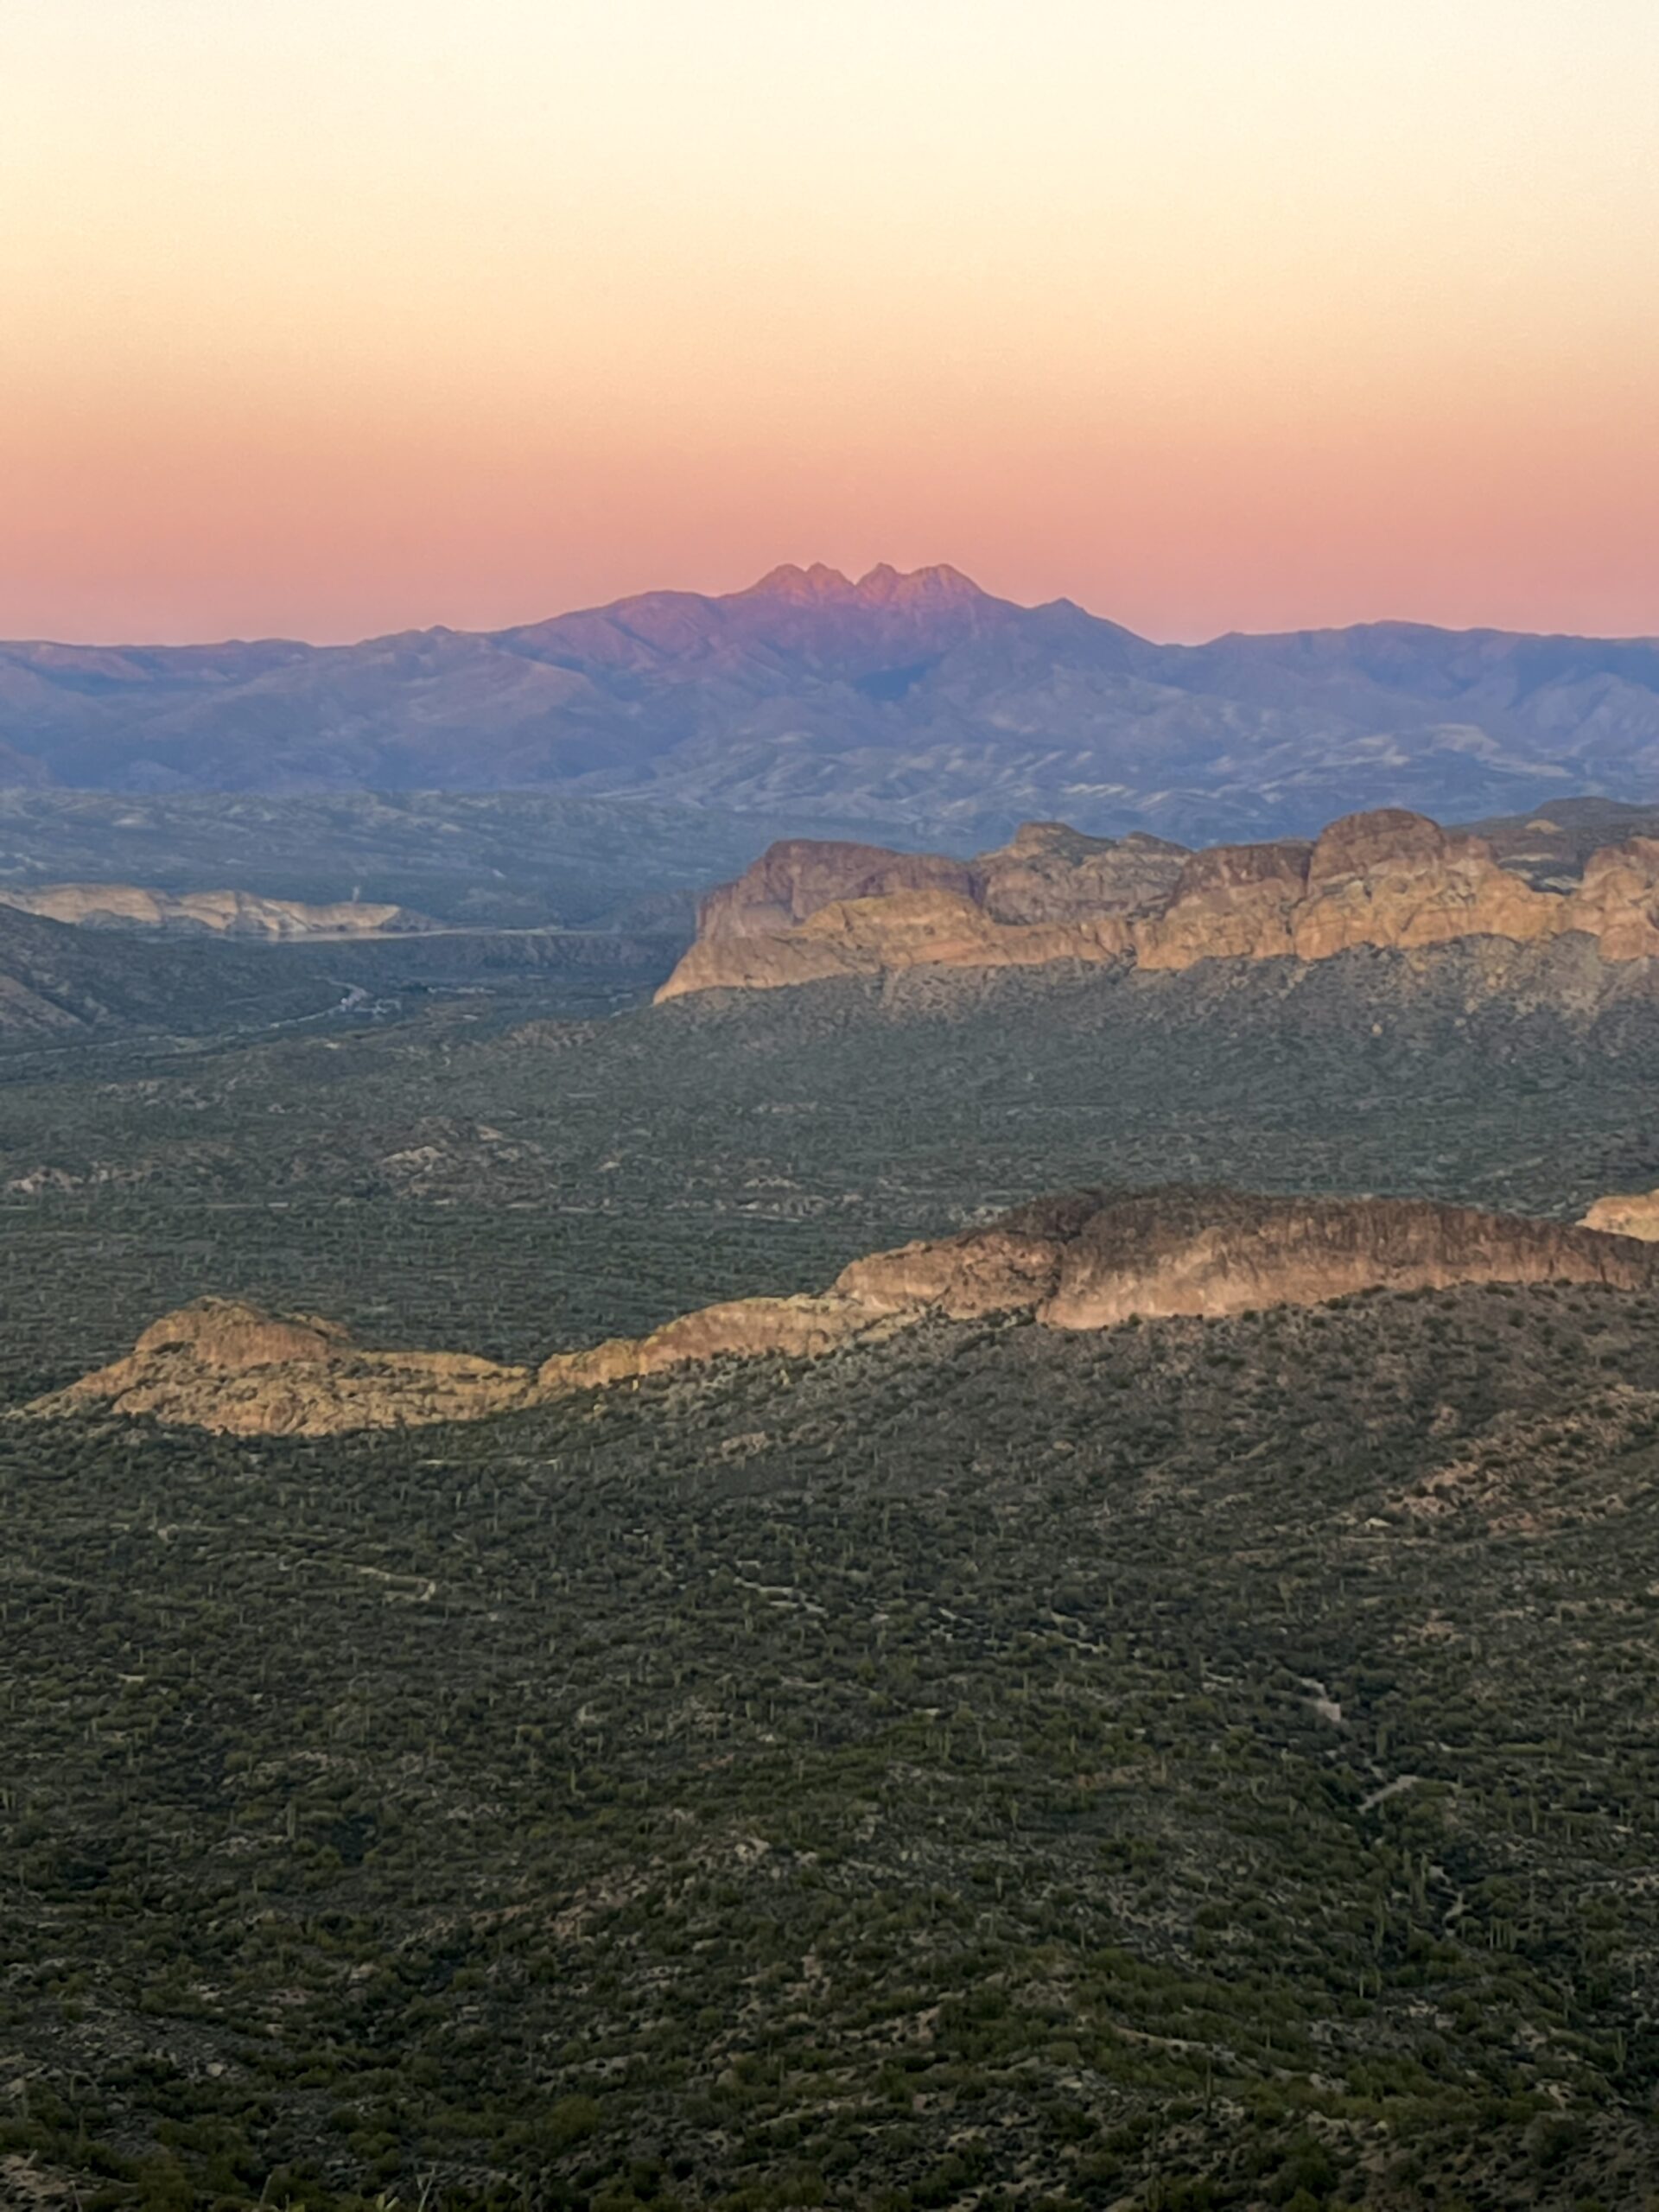 Four Peaks Mountain at Sunset